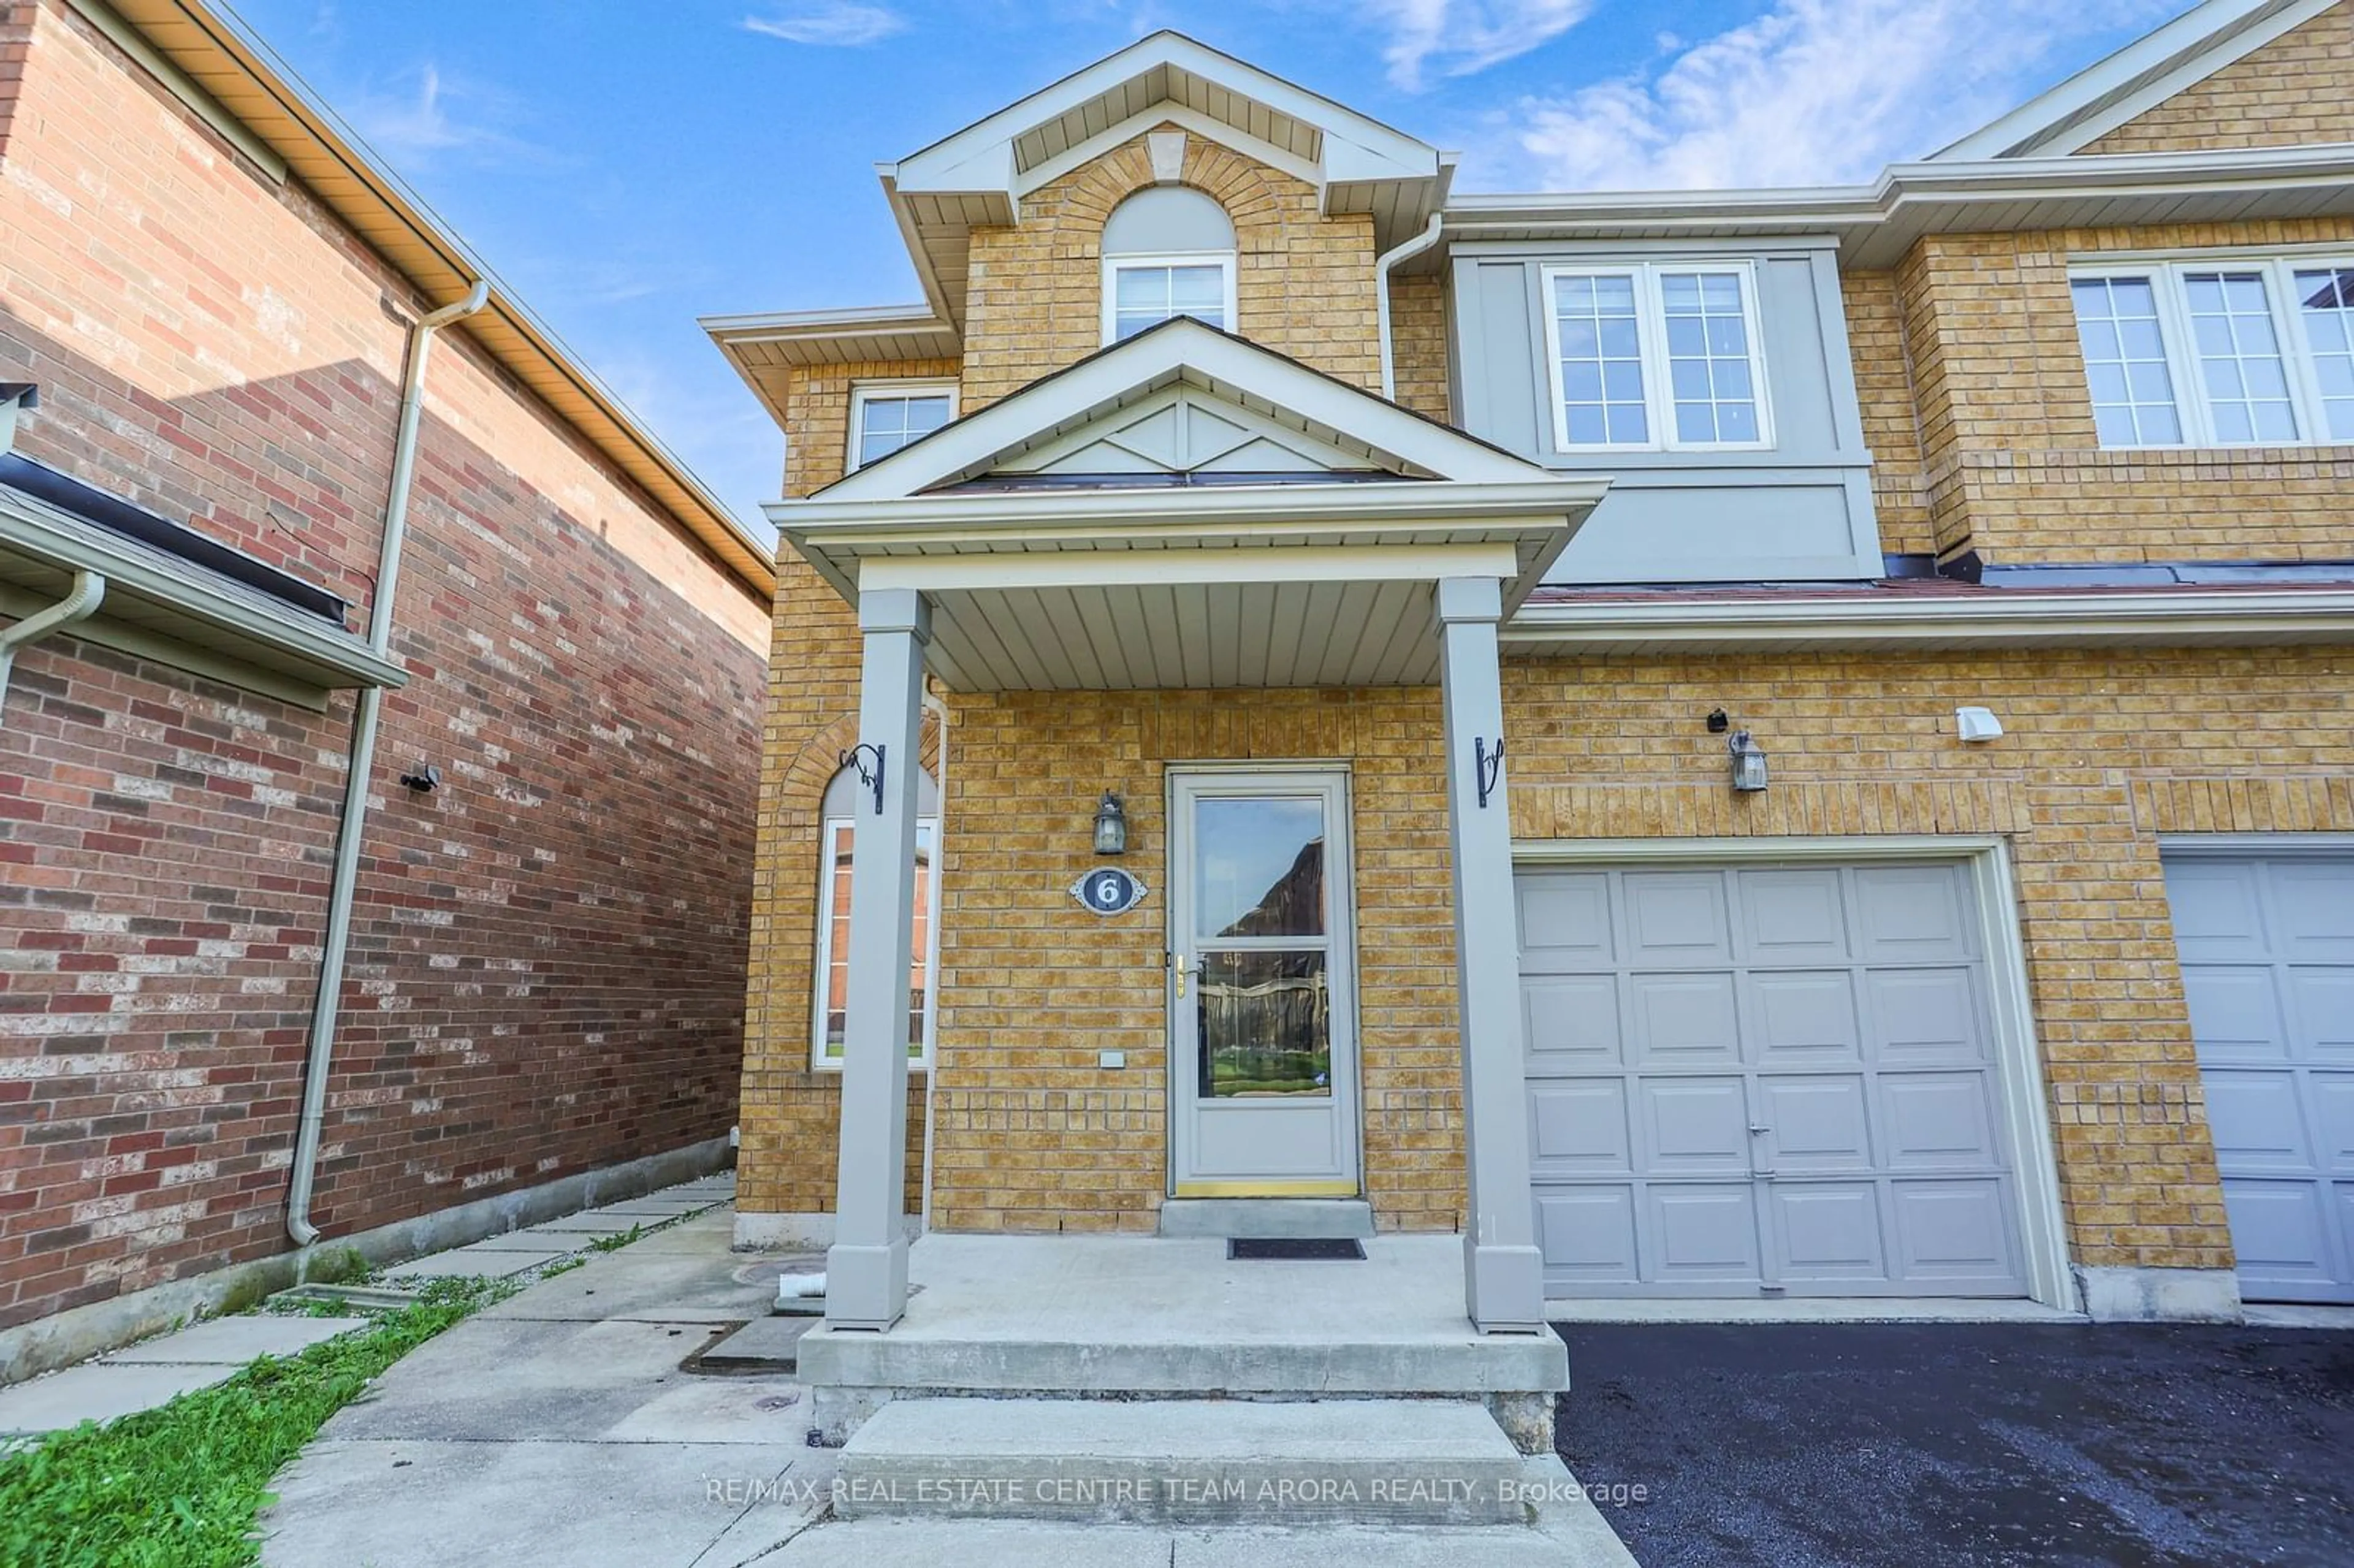 Home with brick exterior material for 6 Commodore Dr, Brampton Ontario L6X 0S4